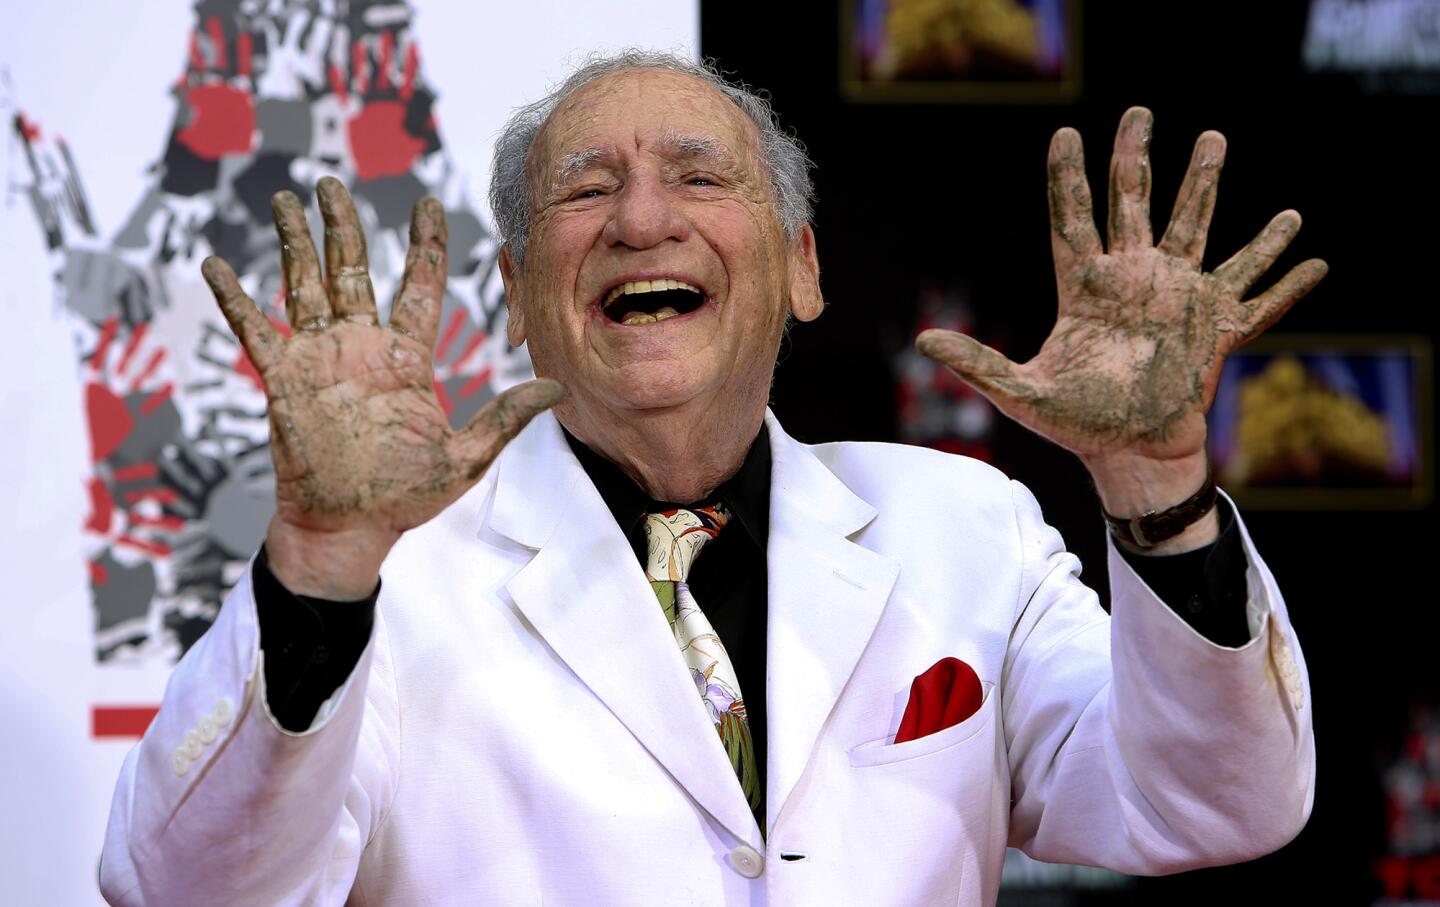 Mel Brooks displays his hands, including a fake extra finger, after he placed them in concrete during a ceremony at the TCL Chinese Theatre in Hollywood.